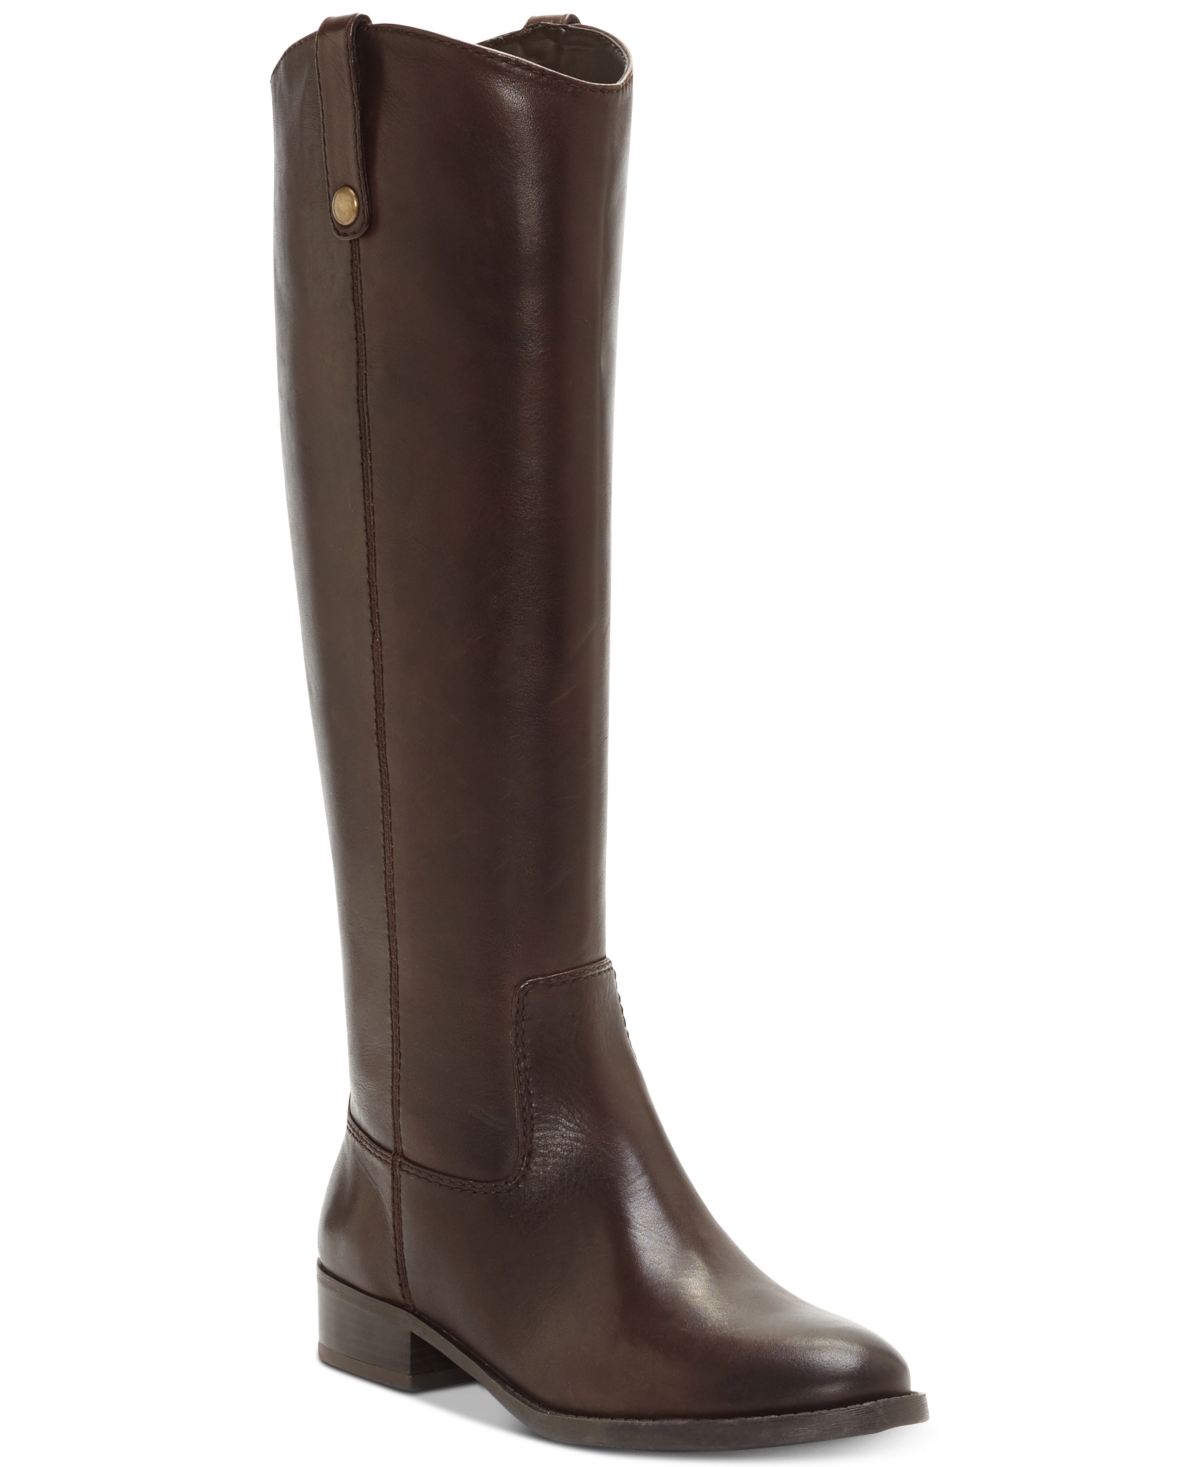 INC INTERNATIONAL CONCEPTS FAWNE RIDING LEATHER BOOTS, CREATED FOR MACY'S WOMEN'S SHOES